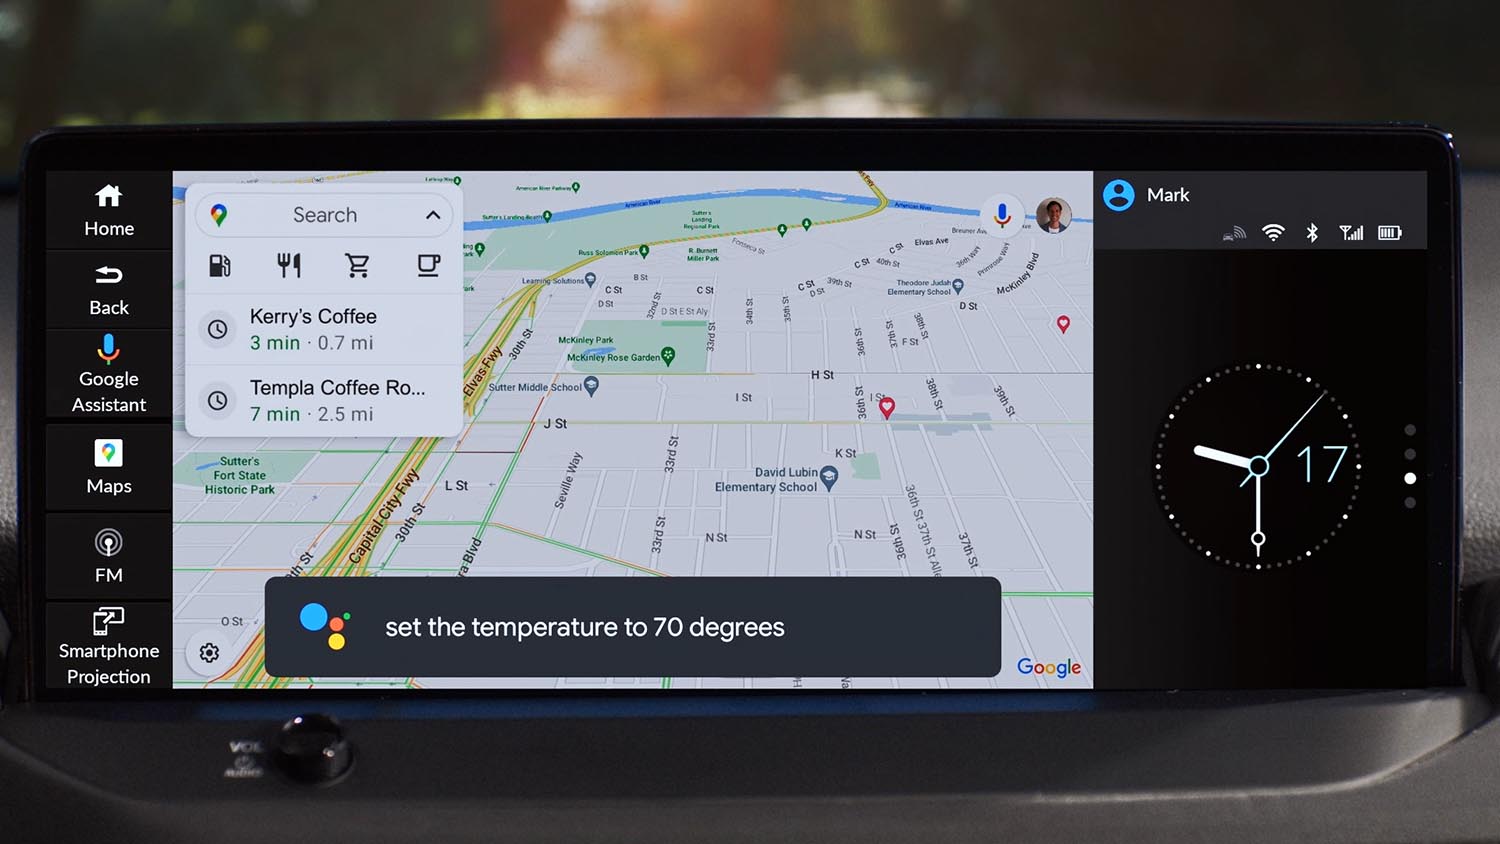 View of 2023 Honda Accord infotainment screen with Google Built-In showing Google Maps